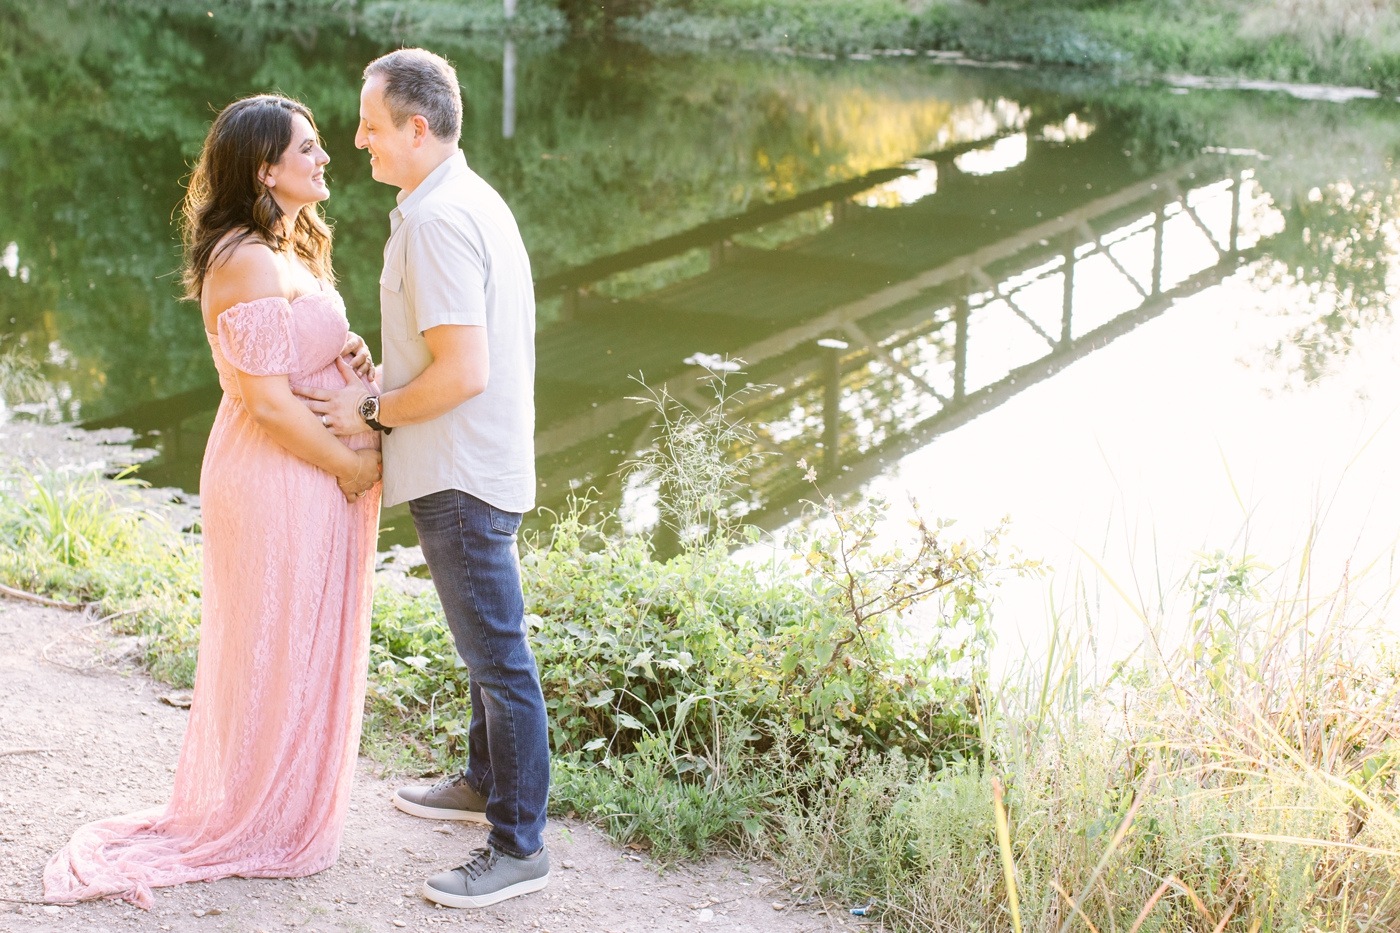 Mom and Dad looking at each other during maternity session in Austin park near the water. Photo by Sana Ahmed Photography.